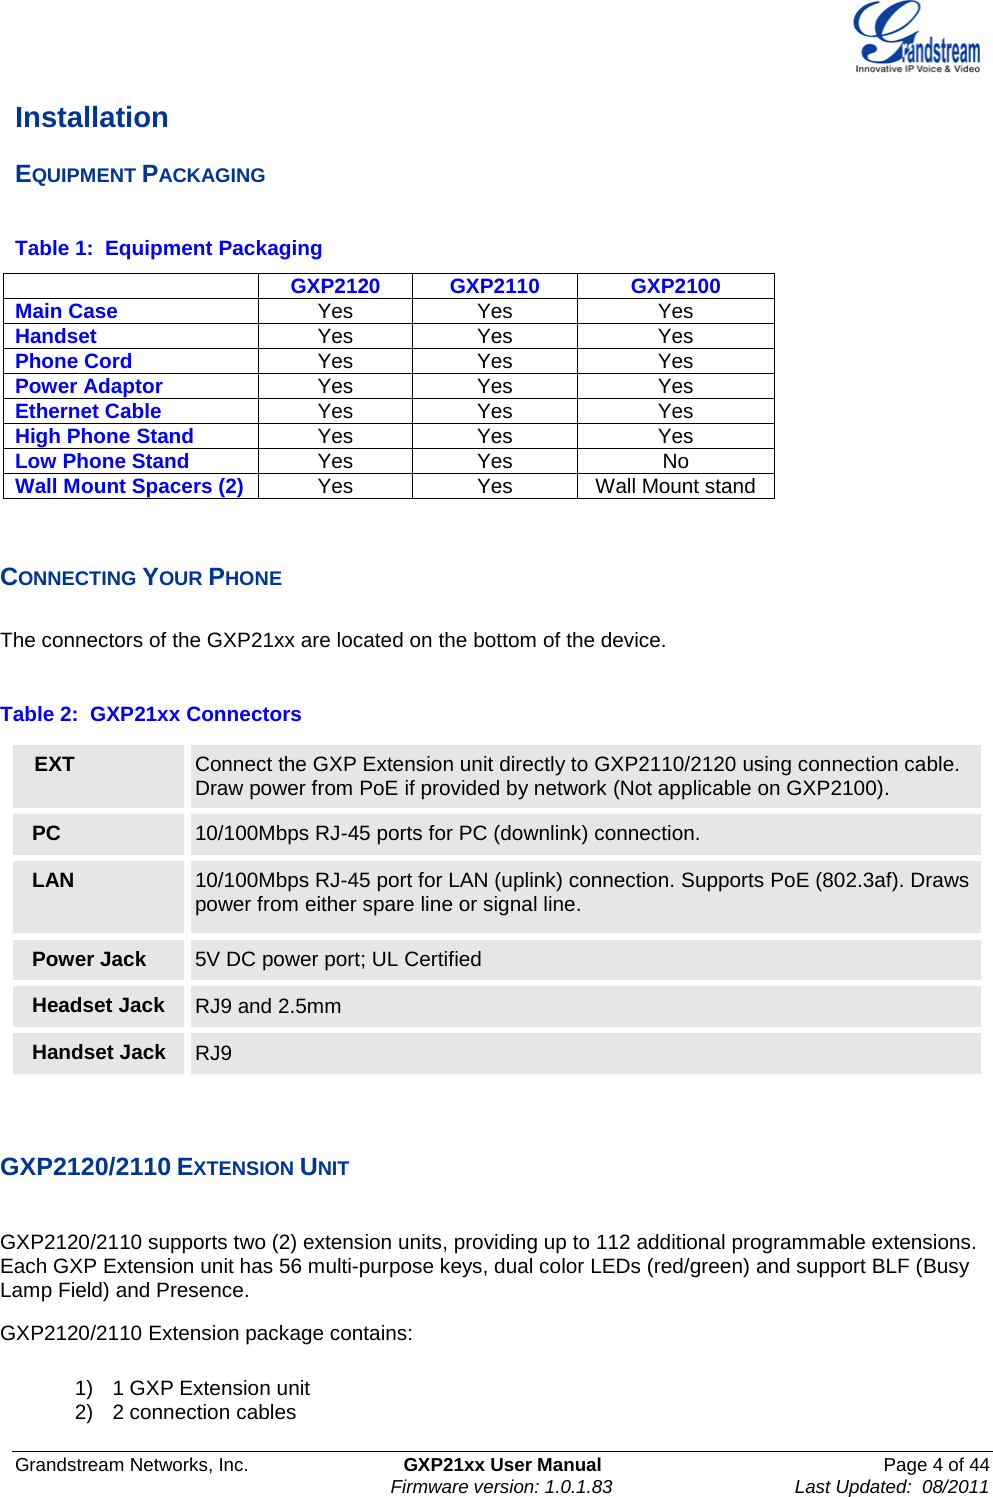  Grandstream Networks, Inc. GXP21xx User Manual Page 4 of 44                                                                        Firmware version: 1.0.1.83                                   Last Updated:  08/2011  Installation EQUIPMENT PACKAGING  Table 1:  Equipment Packaging GXP2120 GXP2110 GXP2100 Main Case Yes Yes Yes Handset Yes Yes Yes Phone Cord Yes Yes Yes Power Adaptor Yes Yes Yes Ethernet Cable Yes Yes Yes High Phone Stand Yes Yes Yes Low Phone Stand Yes Yes No Wall Mount Spacers (2) Yes Yes Wall Mount stand   CONNECTING YOUR PHONE  The connectors of the GXP21xx are located on the bottom of the device.   Table 2:  GXP21xx Connectors    EXT Connect the GXP Extension unit directly to GXP2110/2120 using connection cable. Draw power from PoE if provided by network (Not applicable on GXP2100). PC 10/100Mbps RJ-45 ports for PC (downlink) connection. LAN 10/100Mbps RJ-45 port for LAN (uplink) connection. Supports PoE (802.3af). Draws power from either spare line or signal line. Power Jack 5V DC power port; UL Certified Headset Jack RJ9 and 2.5mm Handset Jack RJ9  GXP2120/2110 EXTENSION UNIT   GXP2120/2110 supports two (2) extension units, providing up to 112 additional programmable extensions. Each GXP Extension unit has 56 multi-purpose keys, dual color LEDs (red/green) and support BLF (Busy Lamp Field) and Presence.  GXP2120/2110 Extension package contains:  1)  1 GXP Extension unit 2)  2 connection cables  